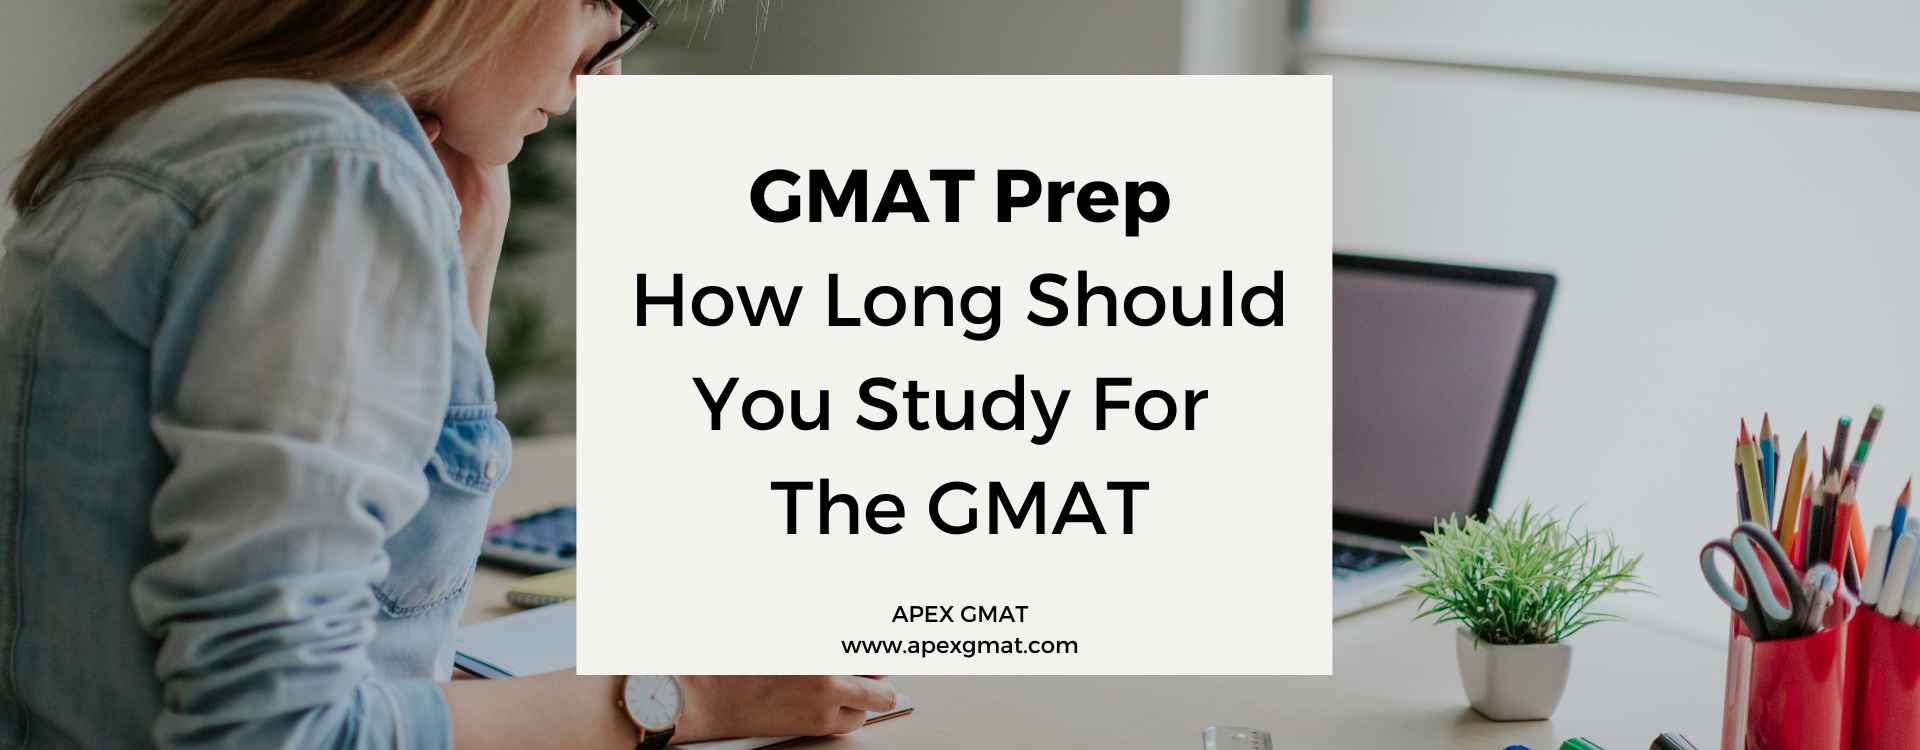 How Long Should You Study For The GMAT